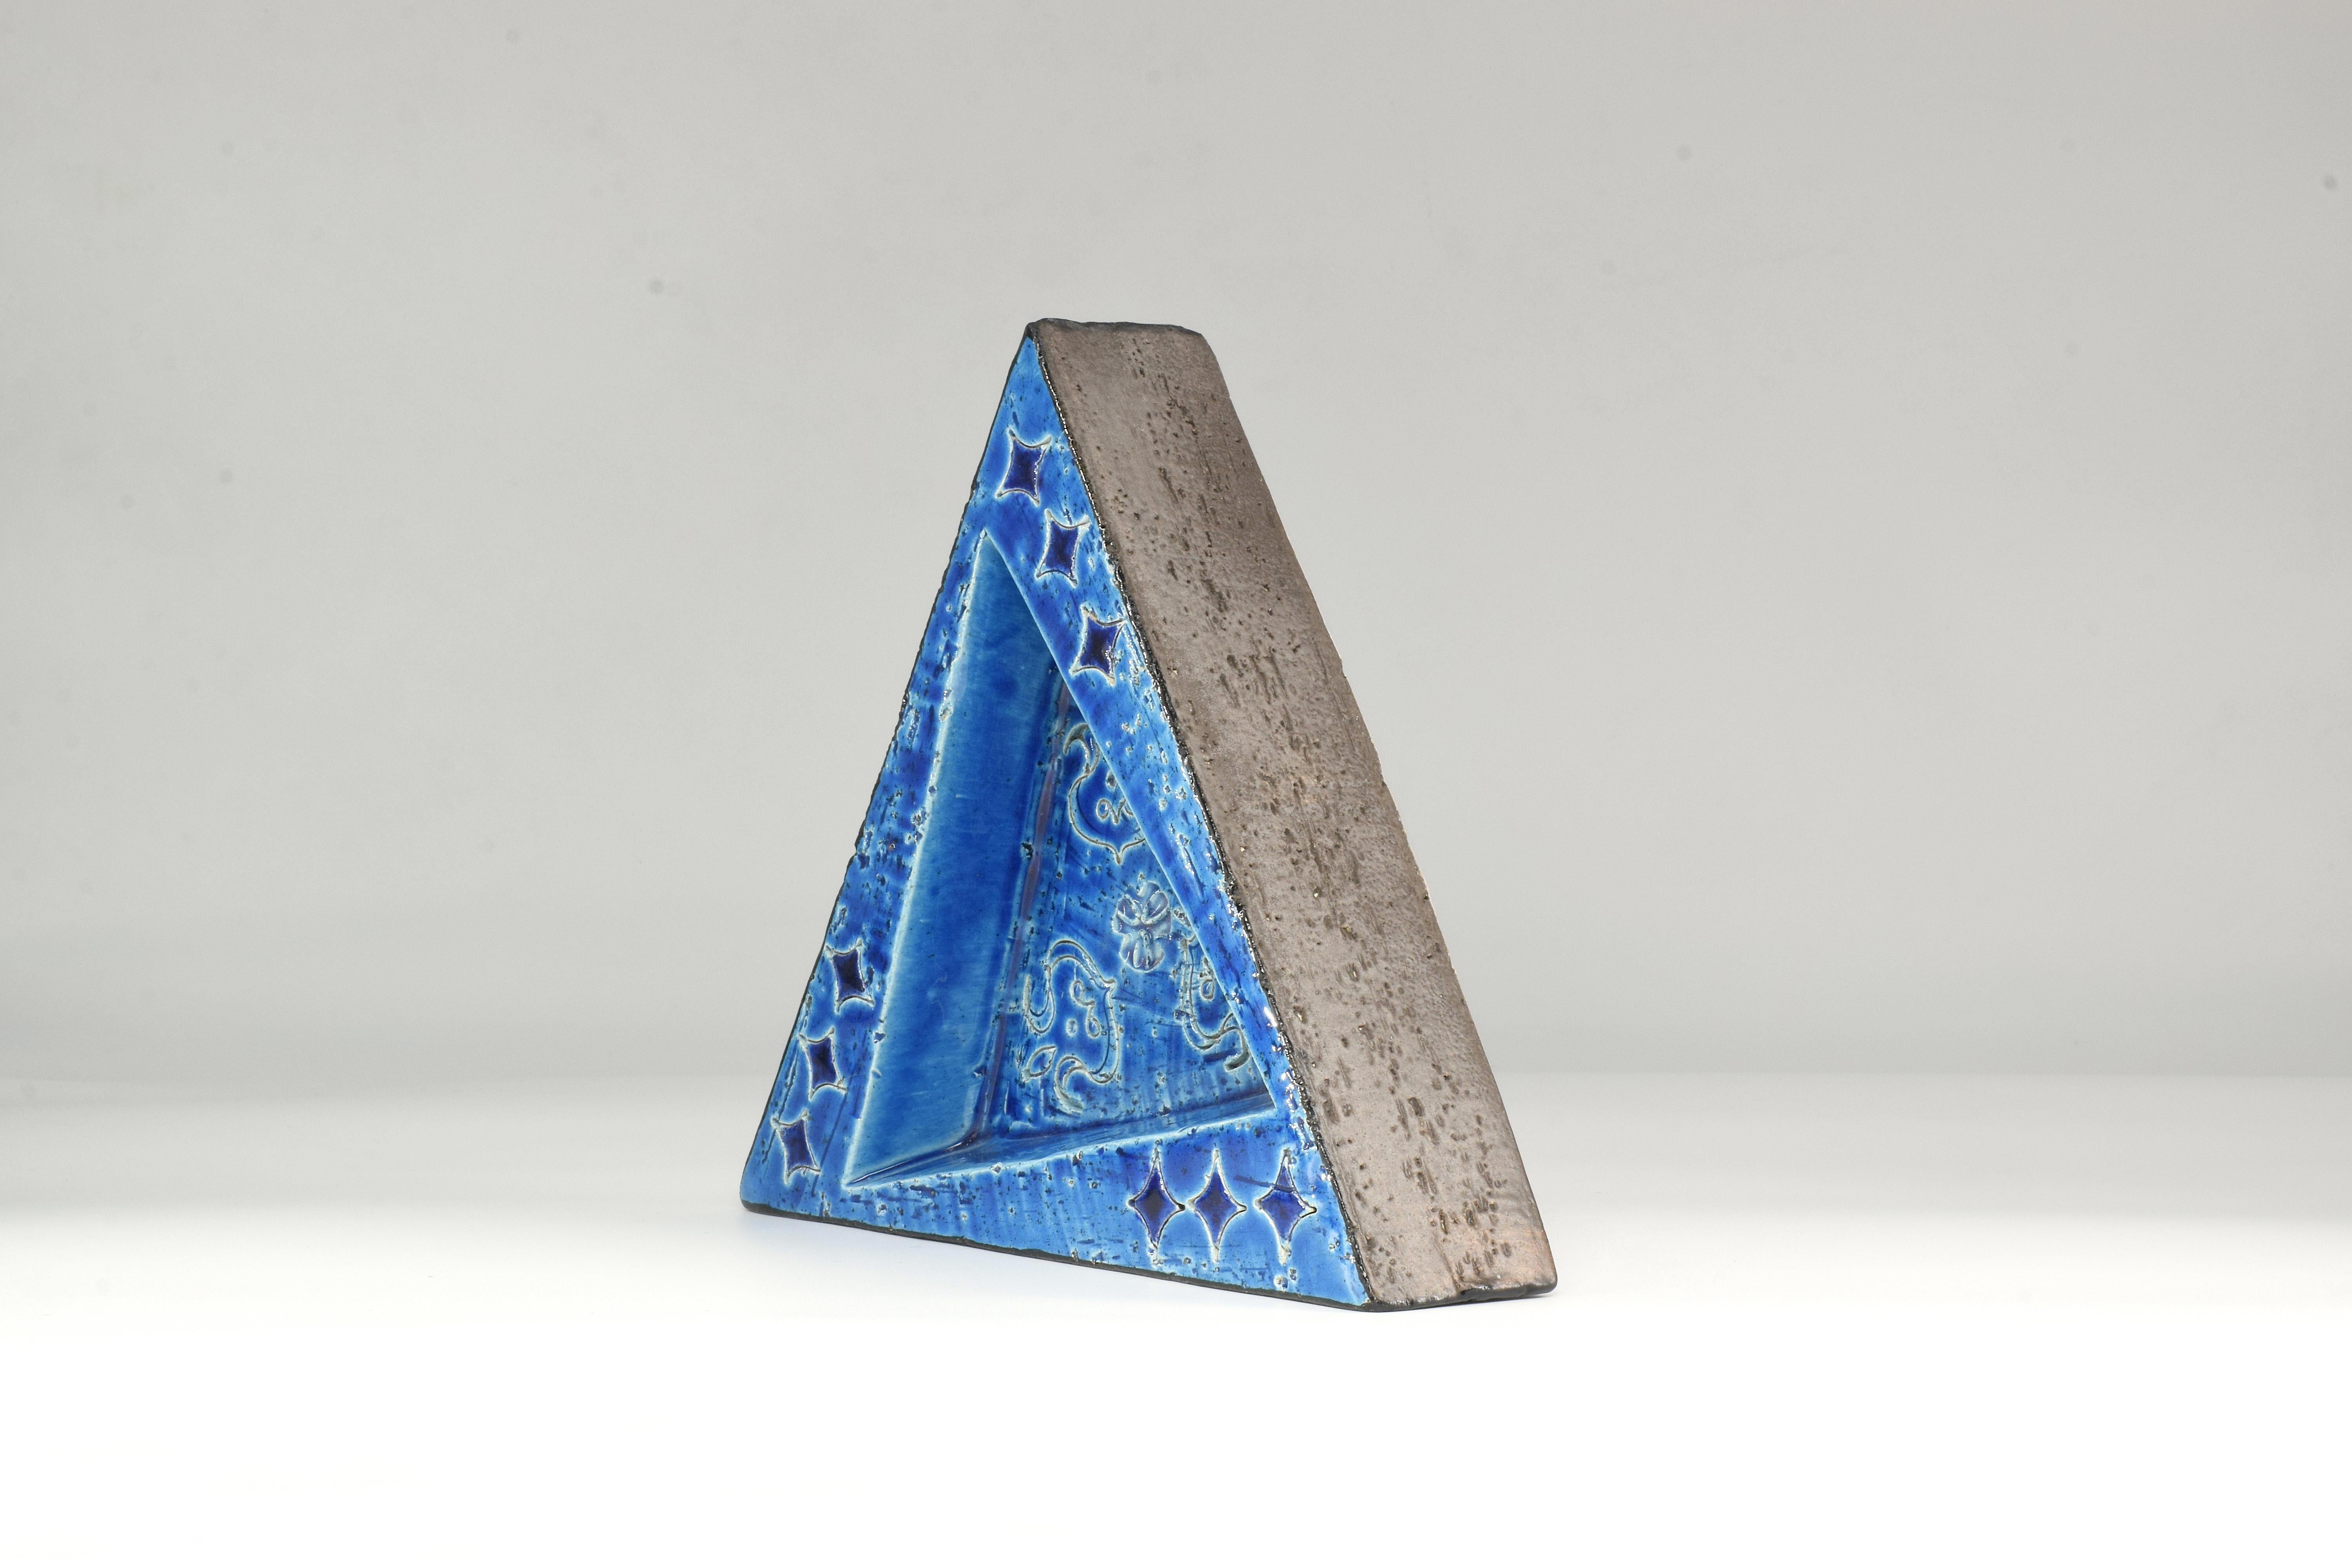 A 1970s Italian triangular-shaped ashtray in charming nuances of blue. Composed of ceramic, this singular decorative piece is designed with typical vintage patterns, with a design that breaks the symmetry of the object.



Spirit Gallery